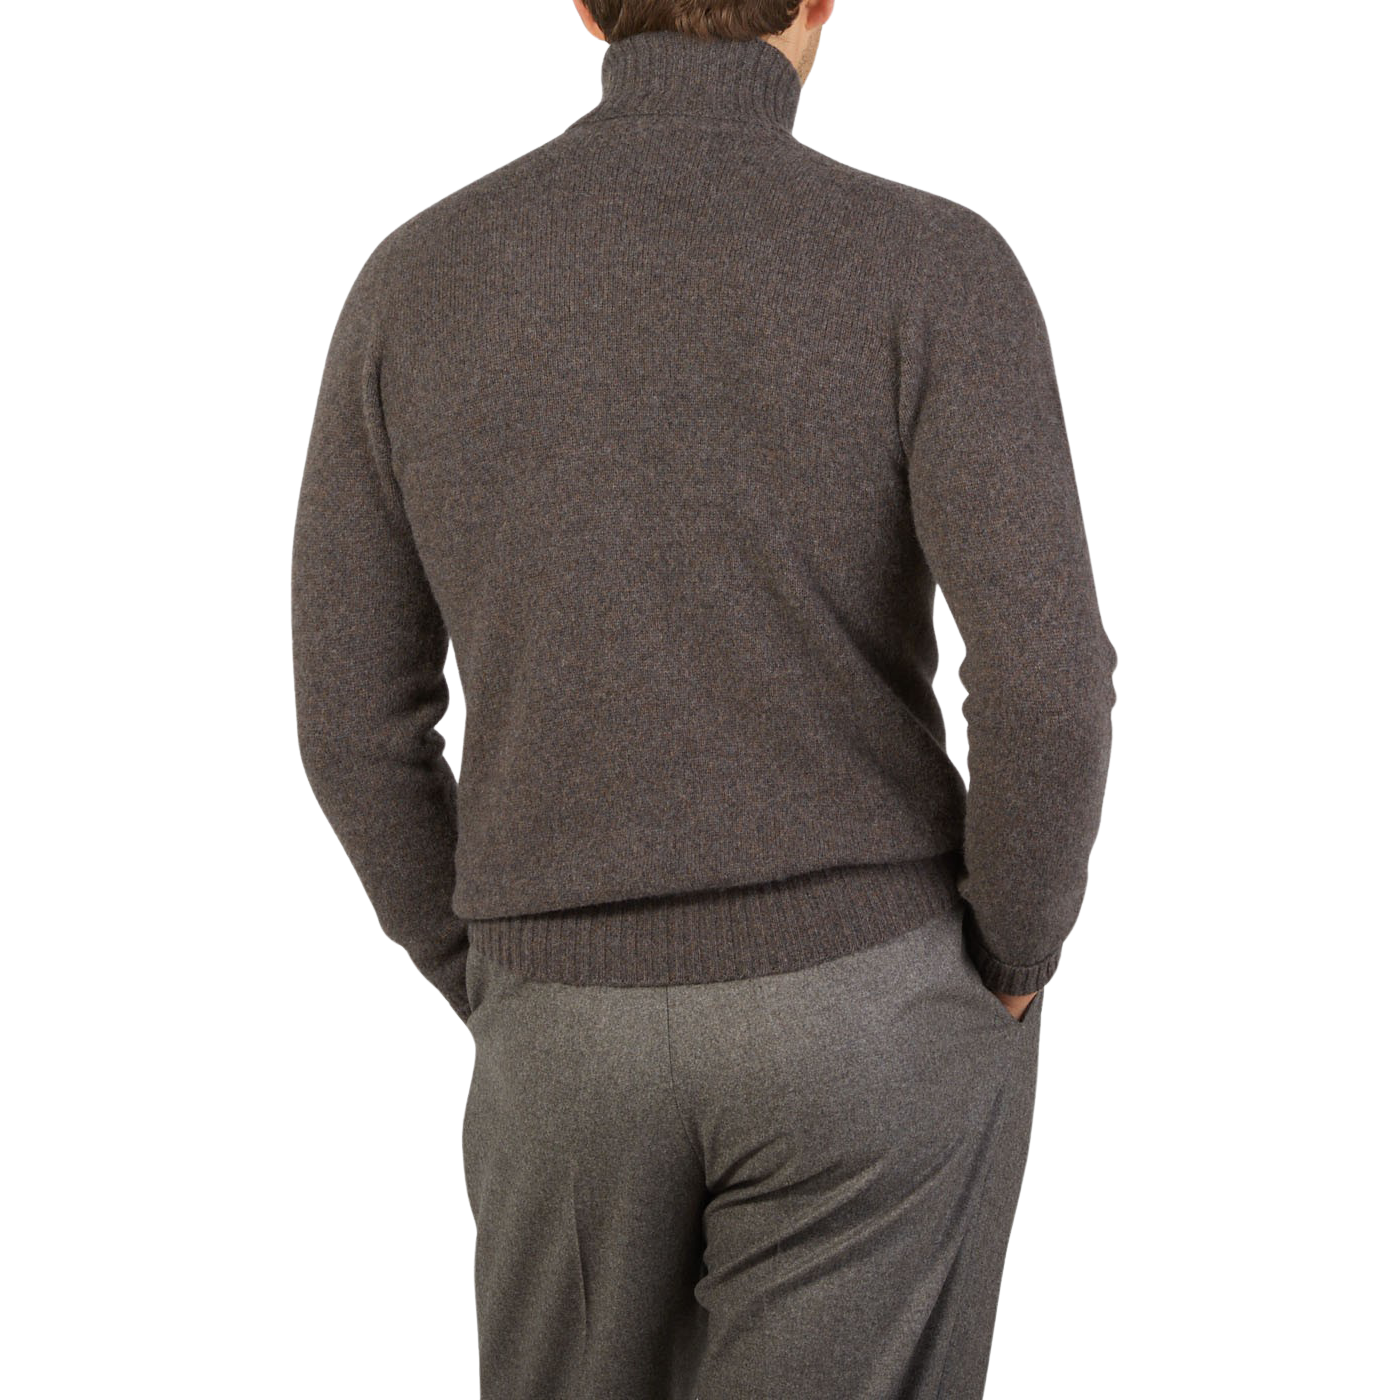 The back view of a man wearing an Altea Brown Melange Wool Cashmere Rollneck sweater.